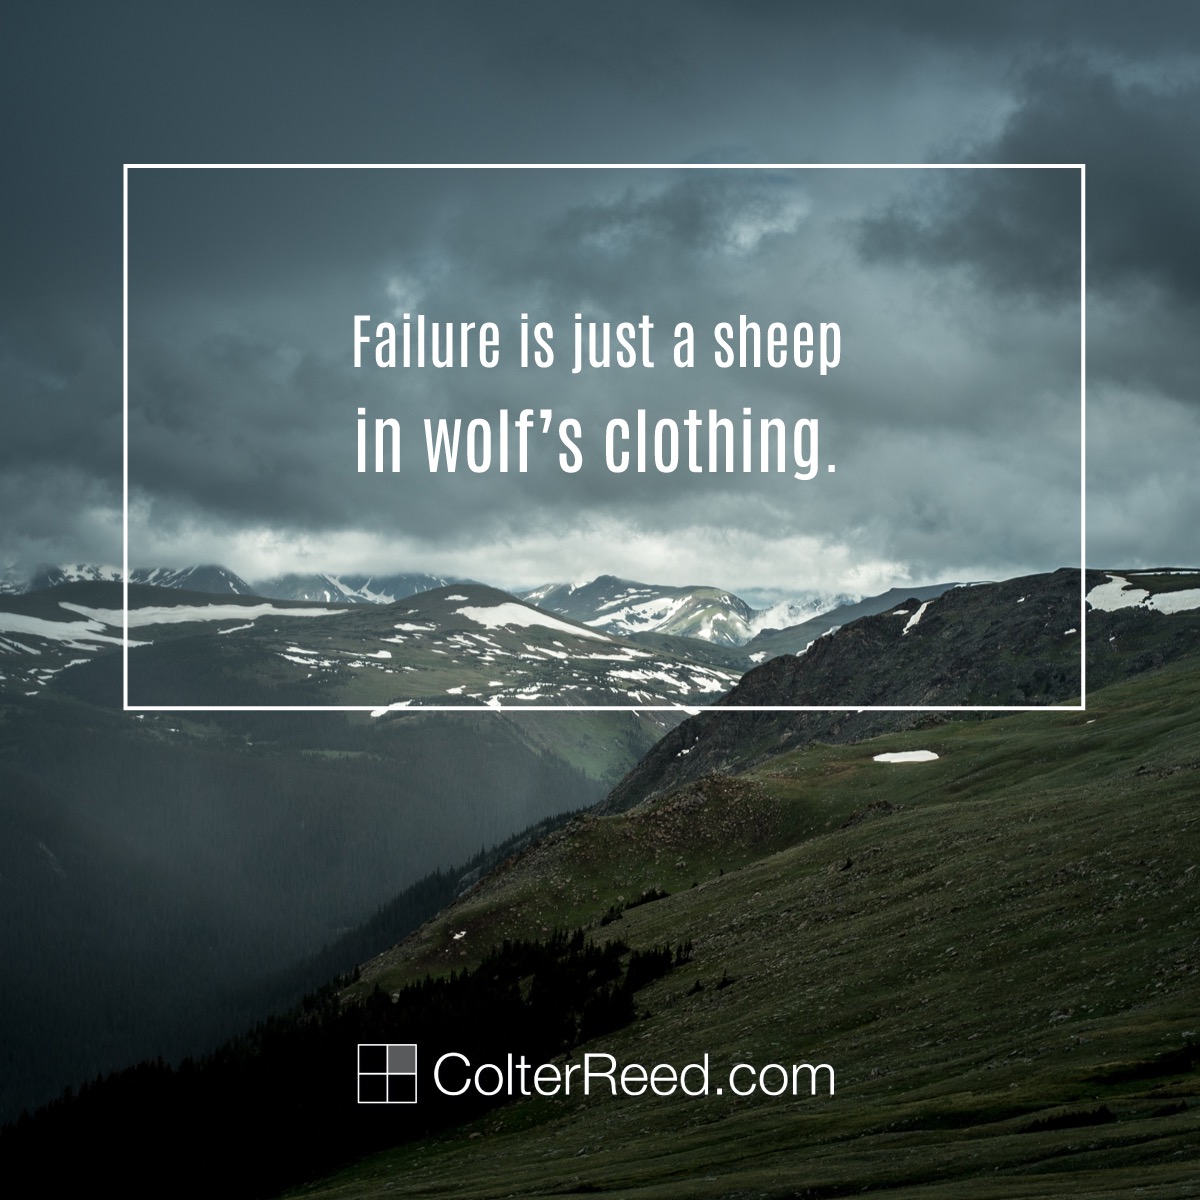 Failure is a sheep in wolf’s clothing.